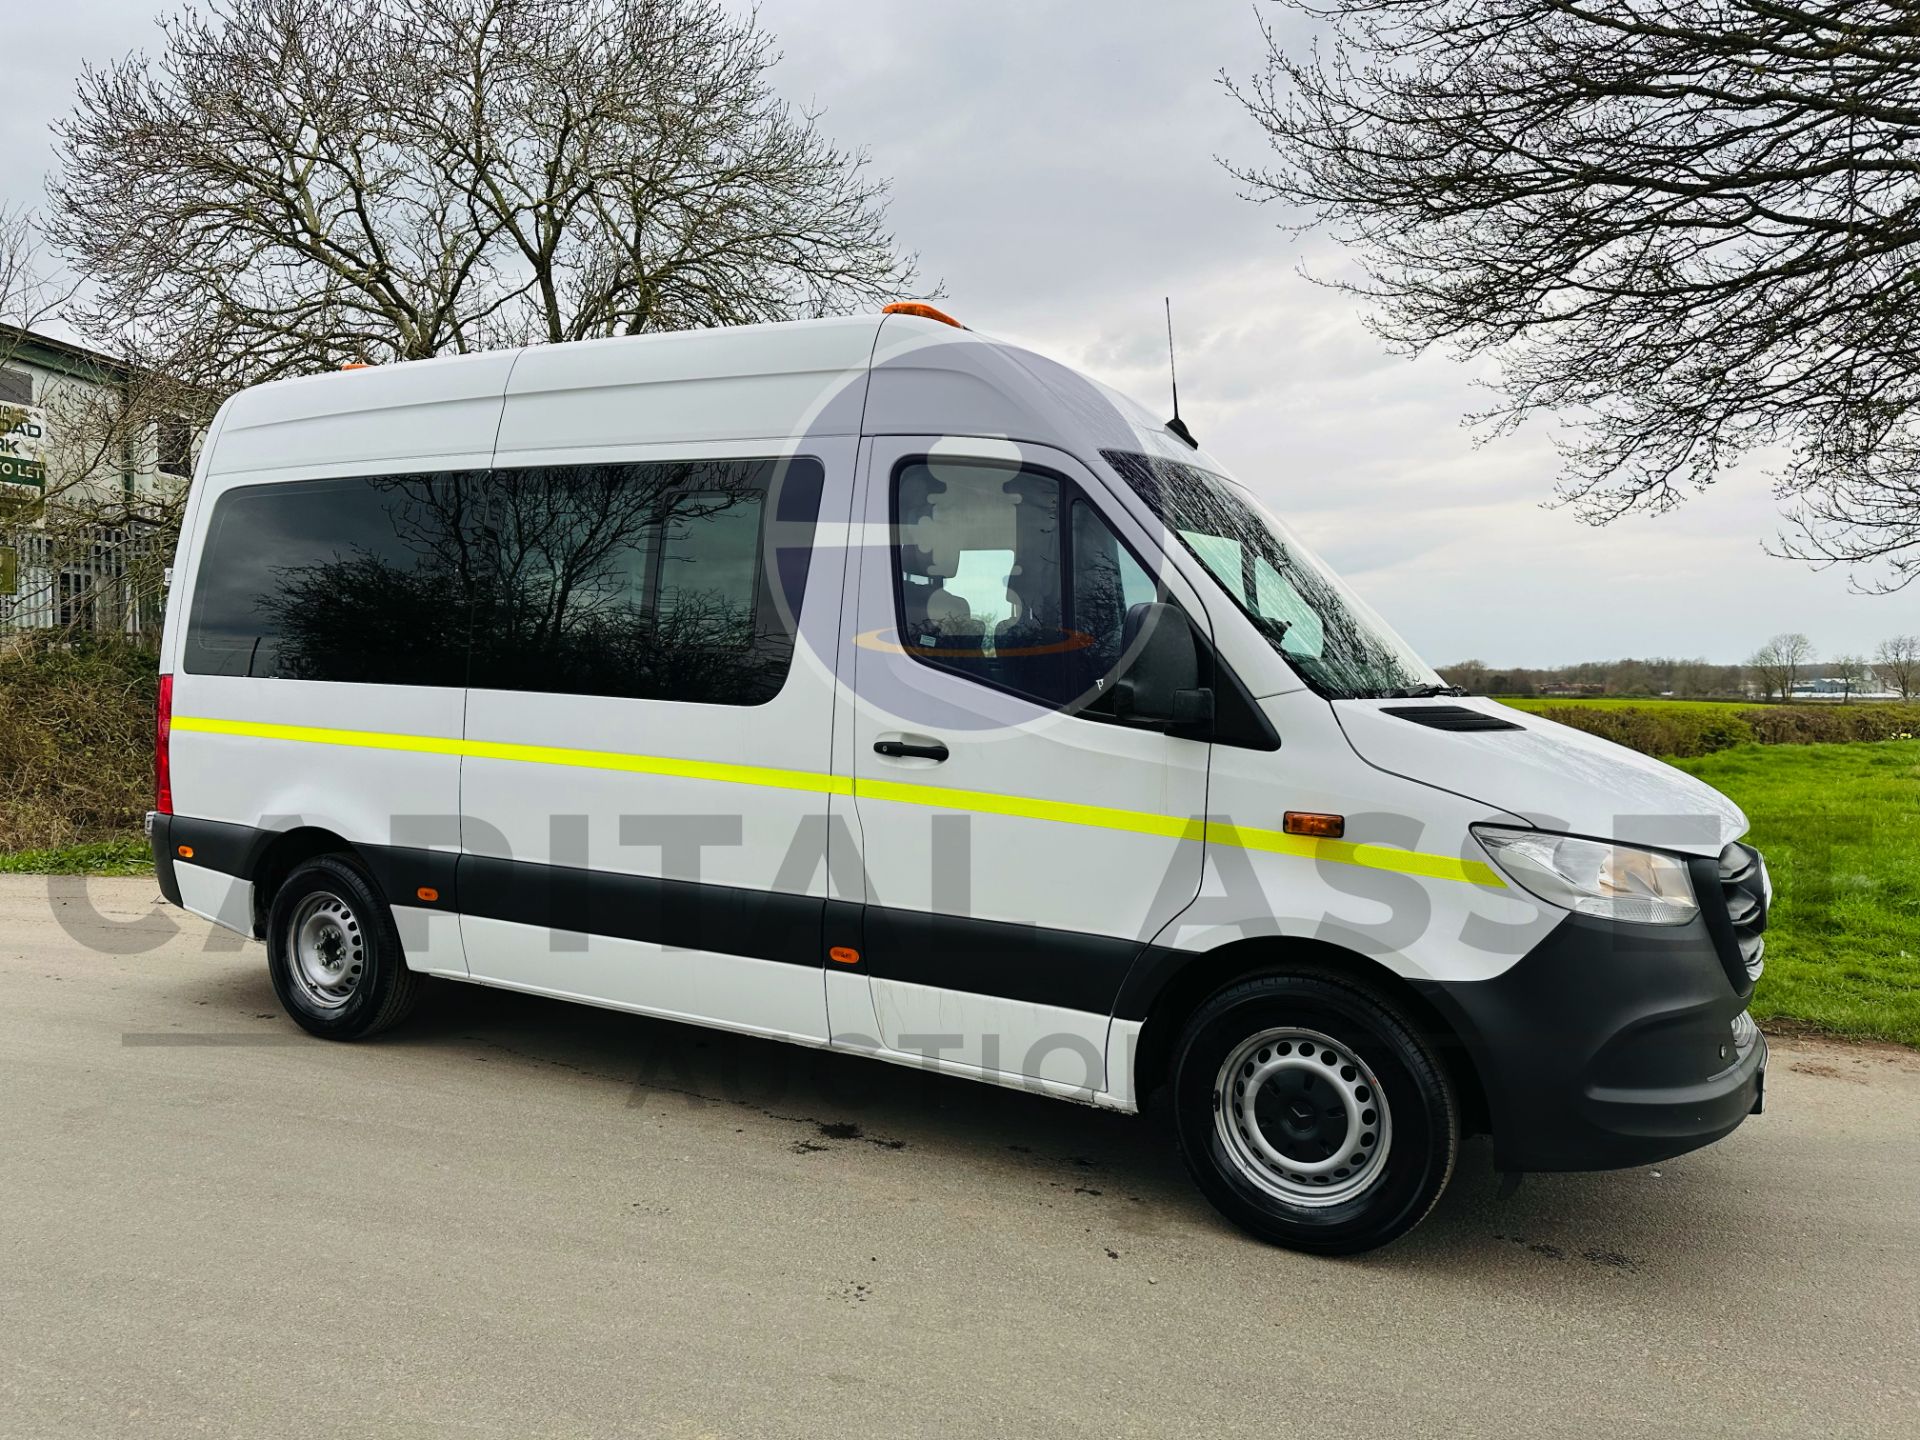 (ON SALE) MERCEDES SPRINTER 314CDI AUTO MWB MESSING UNIT WITH W/C,MICROWAVE,- 2020 REG- - AIR CON